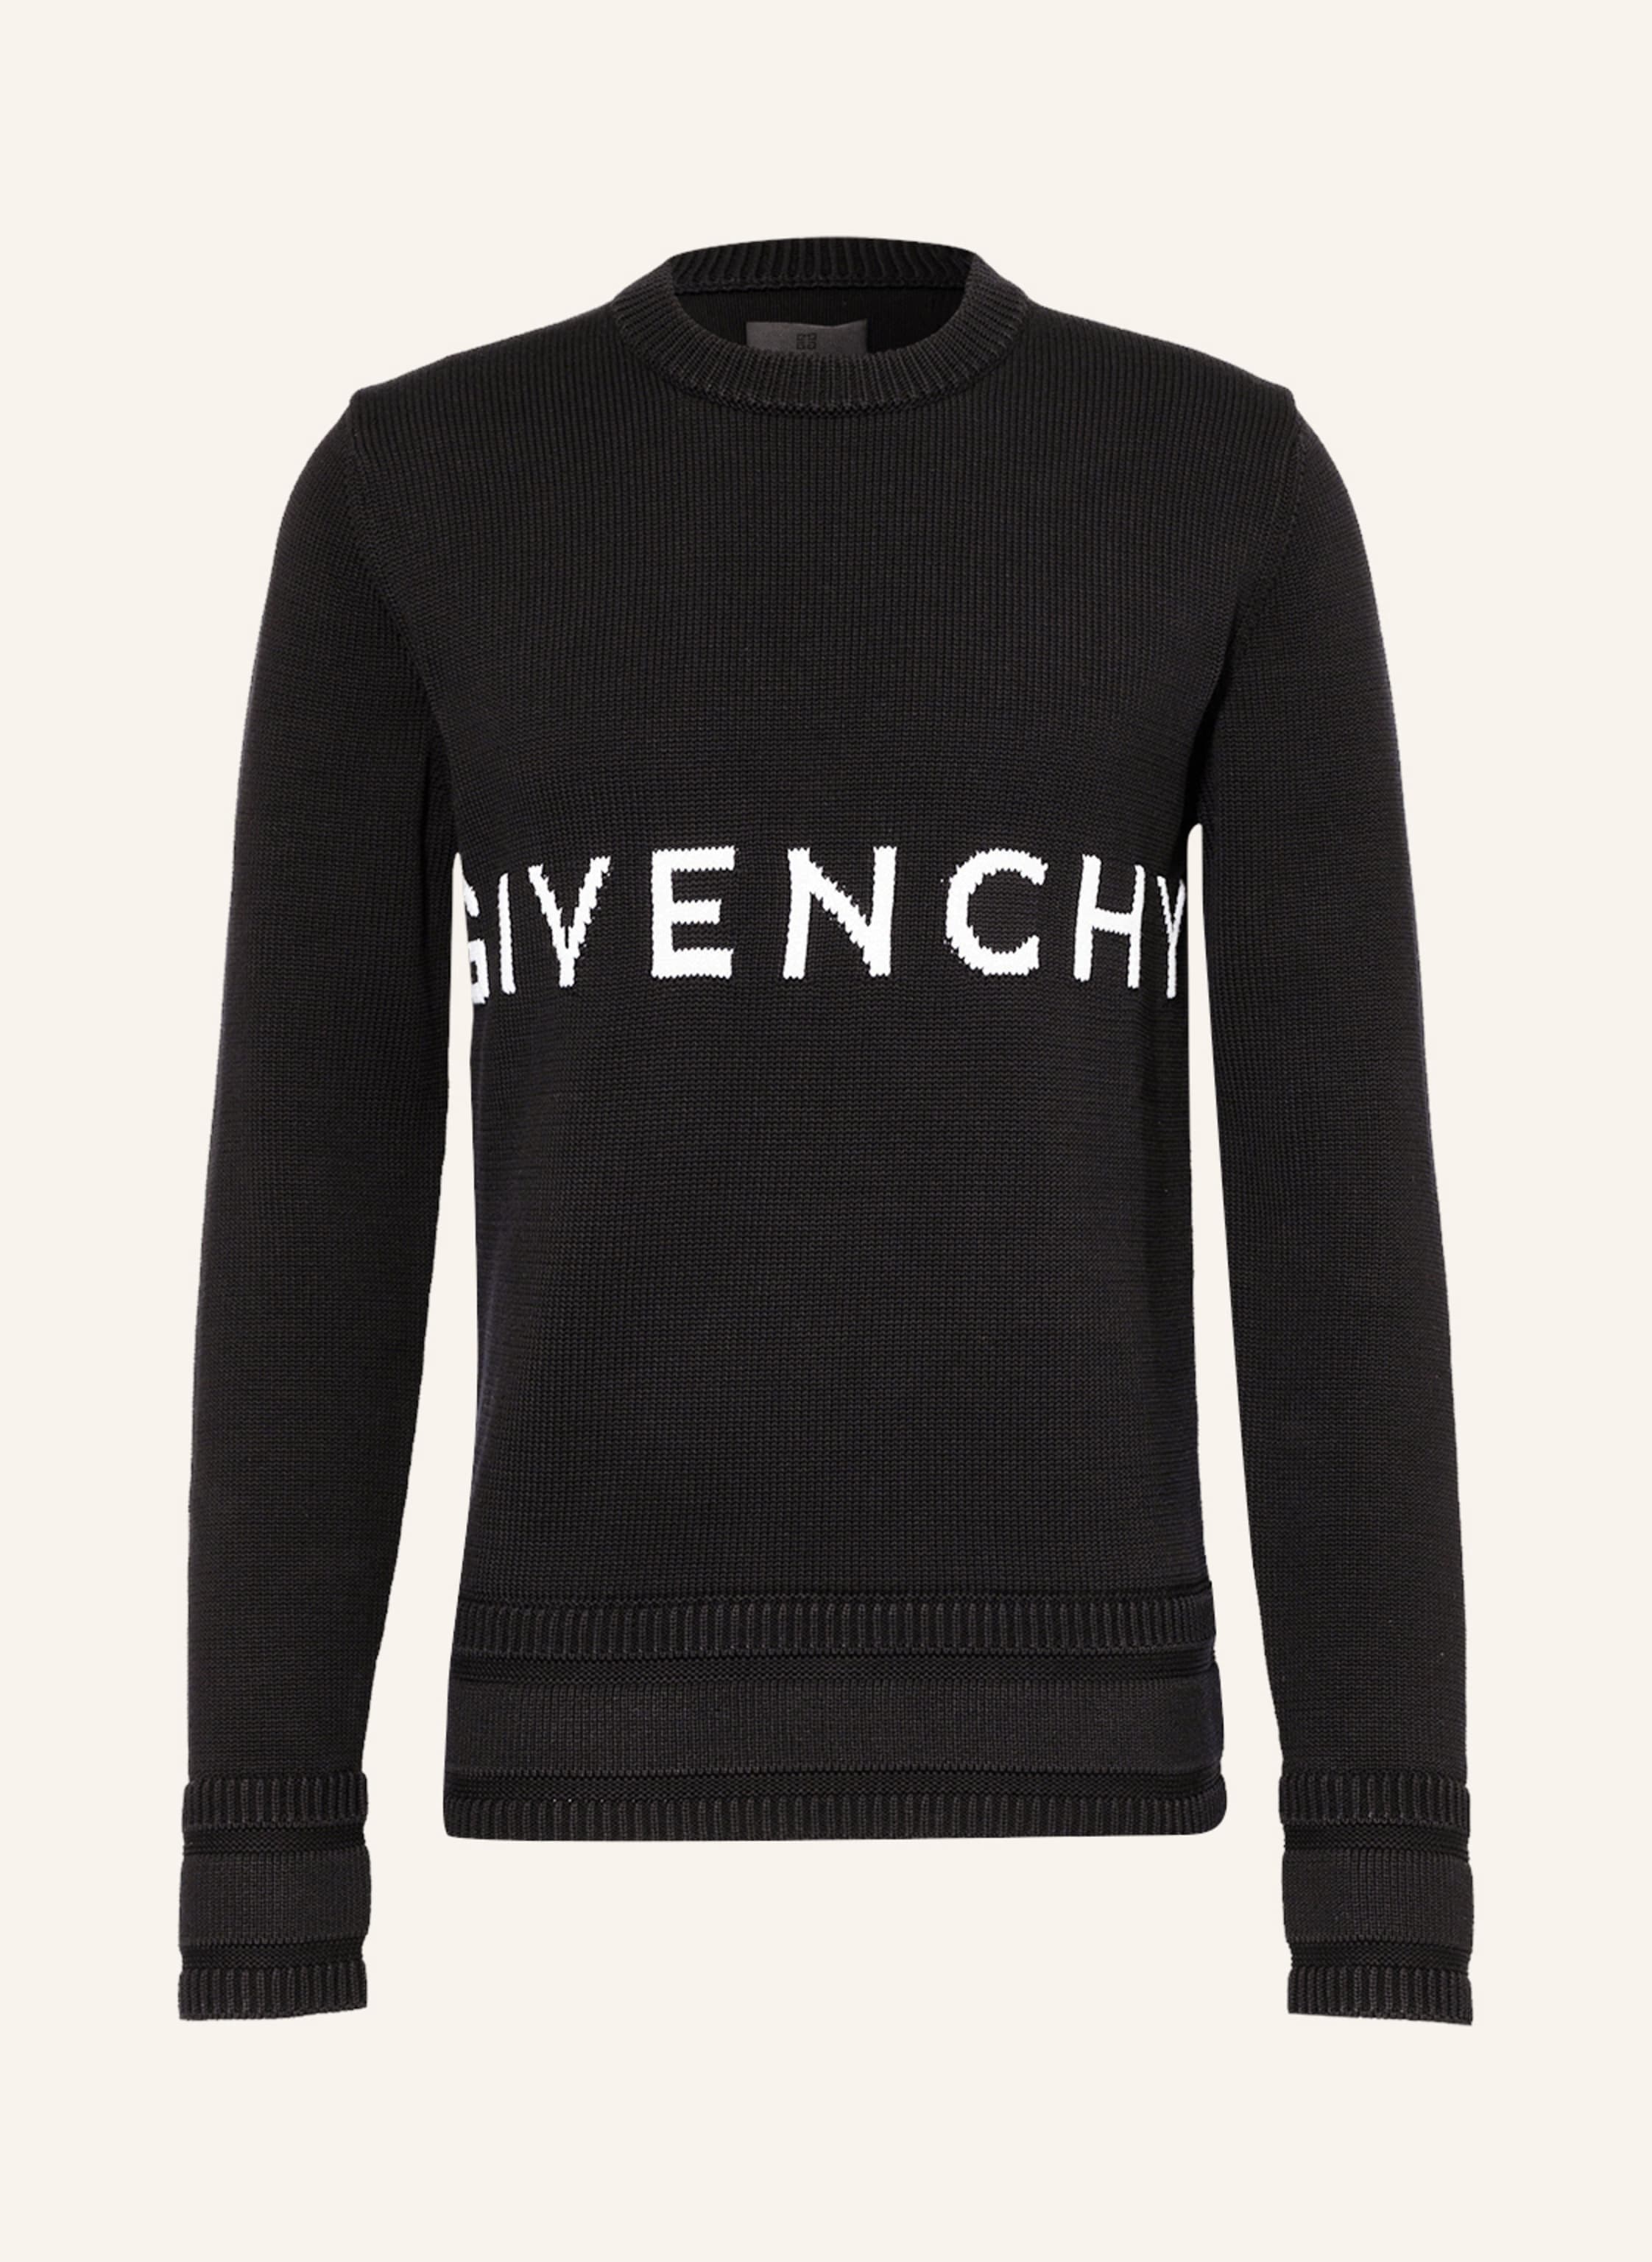 GIVENCHY Sweater in black | Breuninger